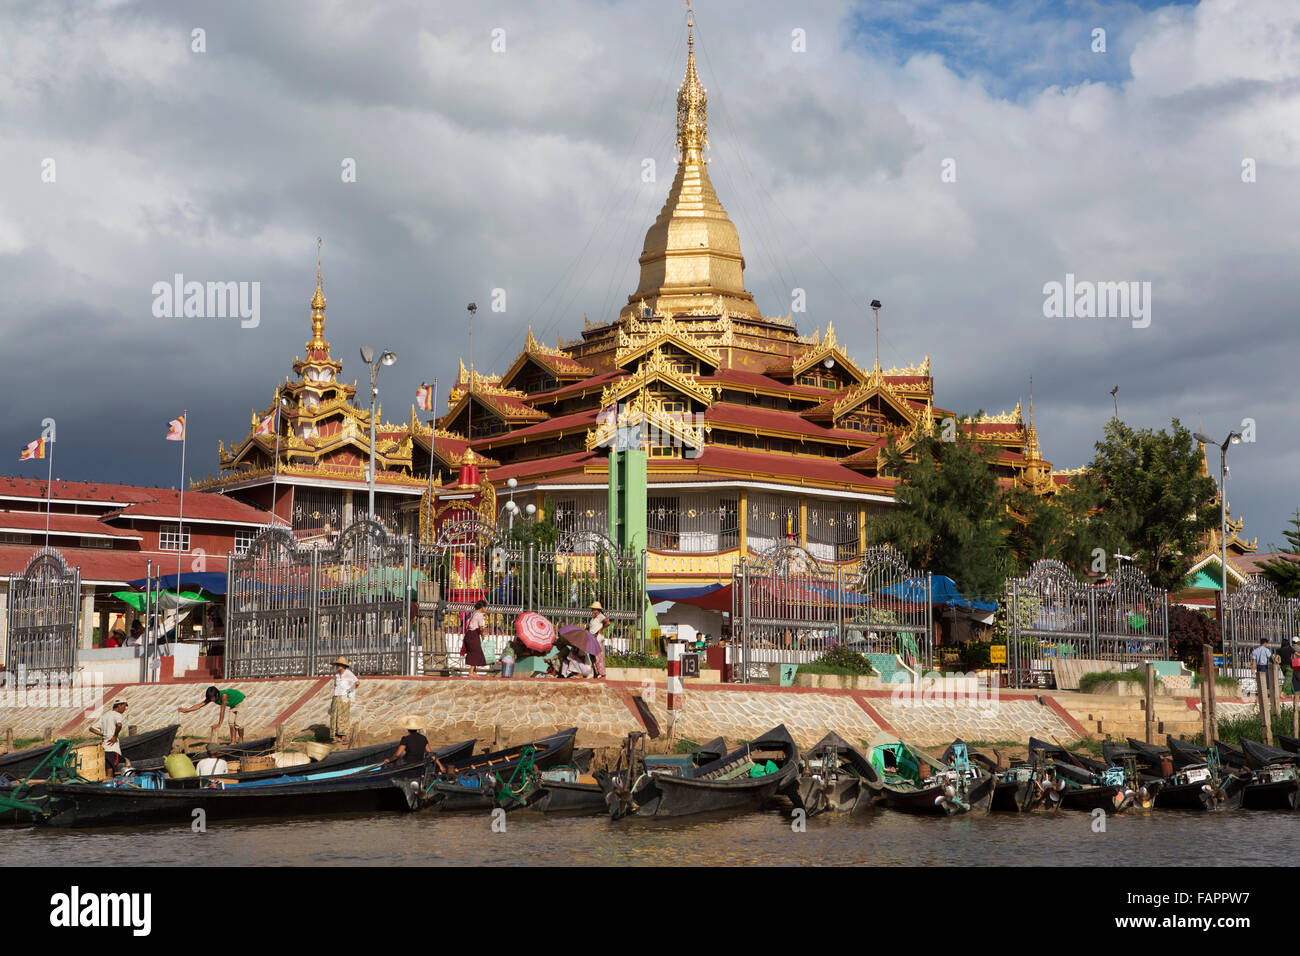 Boats moored by Shwe Indein Pagoda on Inle Lake in Myanmar (Burma). The pagoda is a Buddhist place of worship. Stock Photo